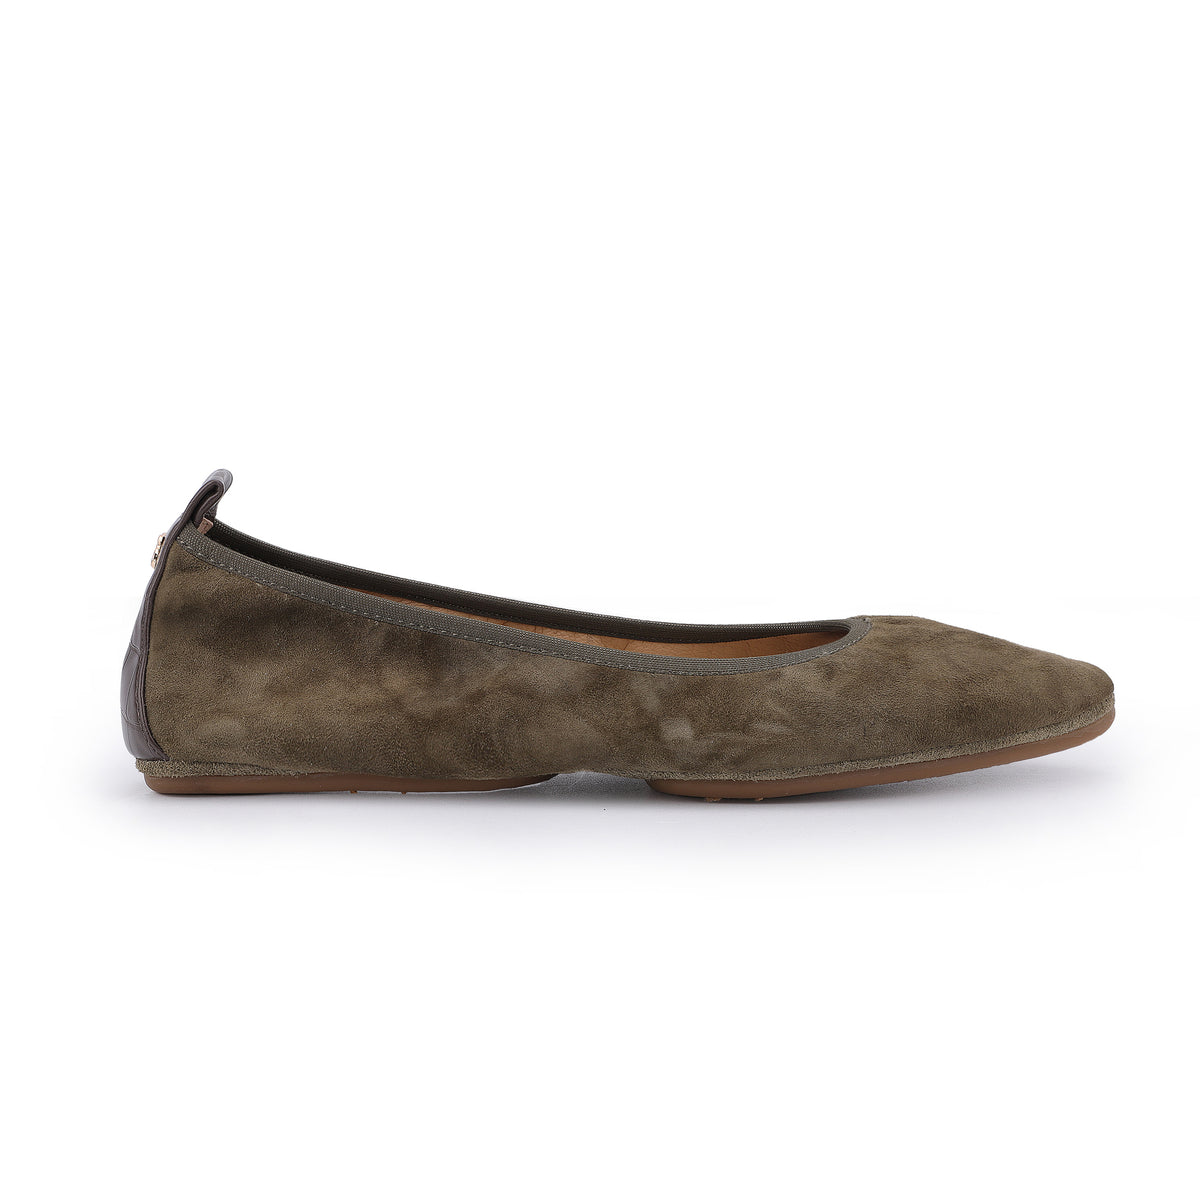 Vienna Pointed Toe Foldable Ballet Flat in Mud Suede